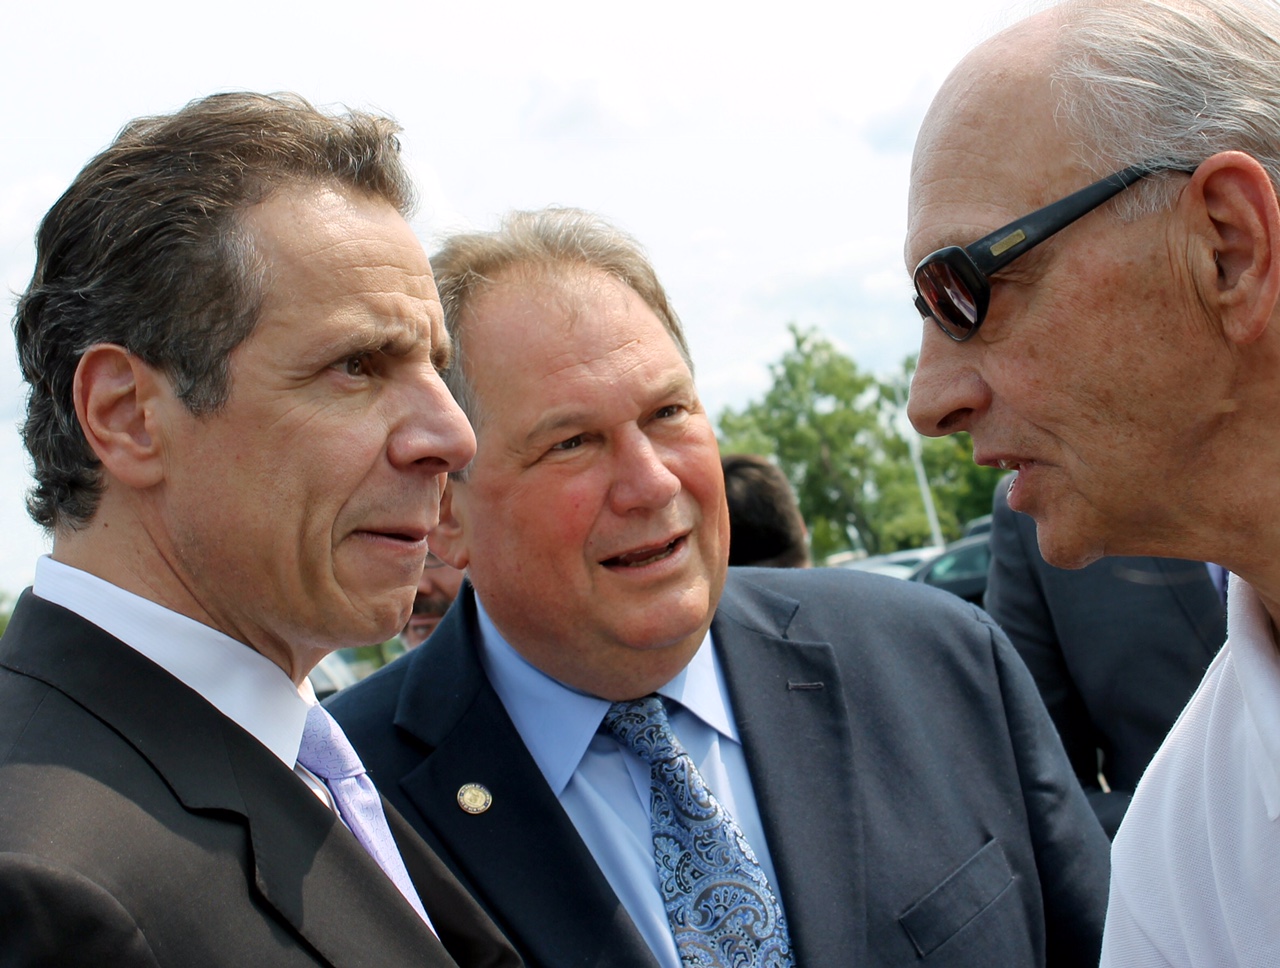 Gov. Cuomo and ex-Assemblyman Ceretto get an earful from a constituent.